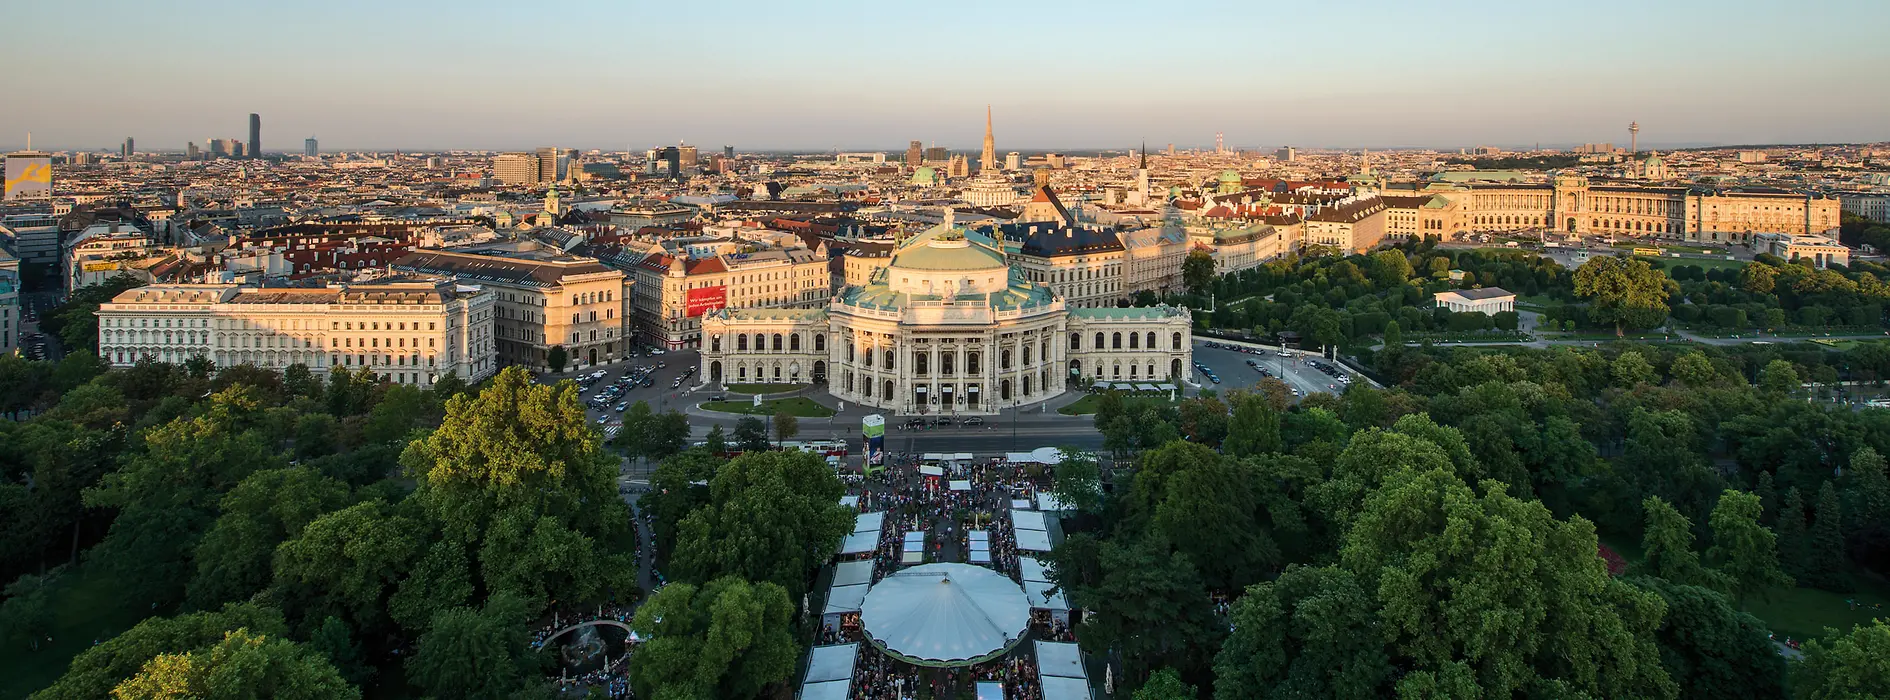 View of Rathausplatz and the Burgtheater